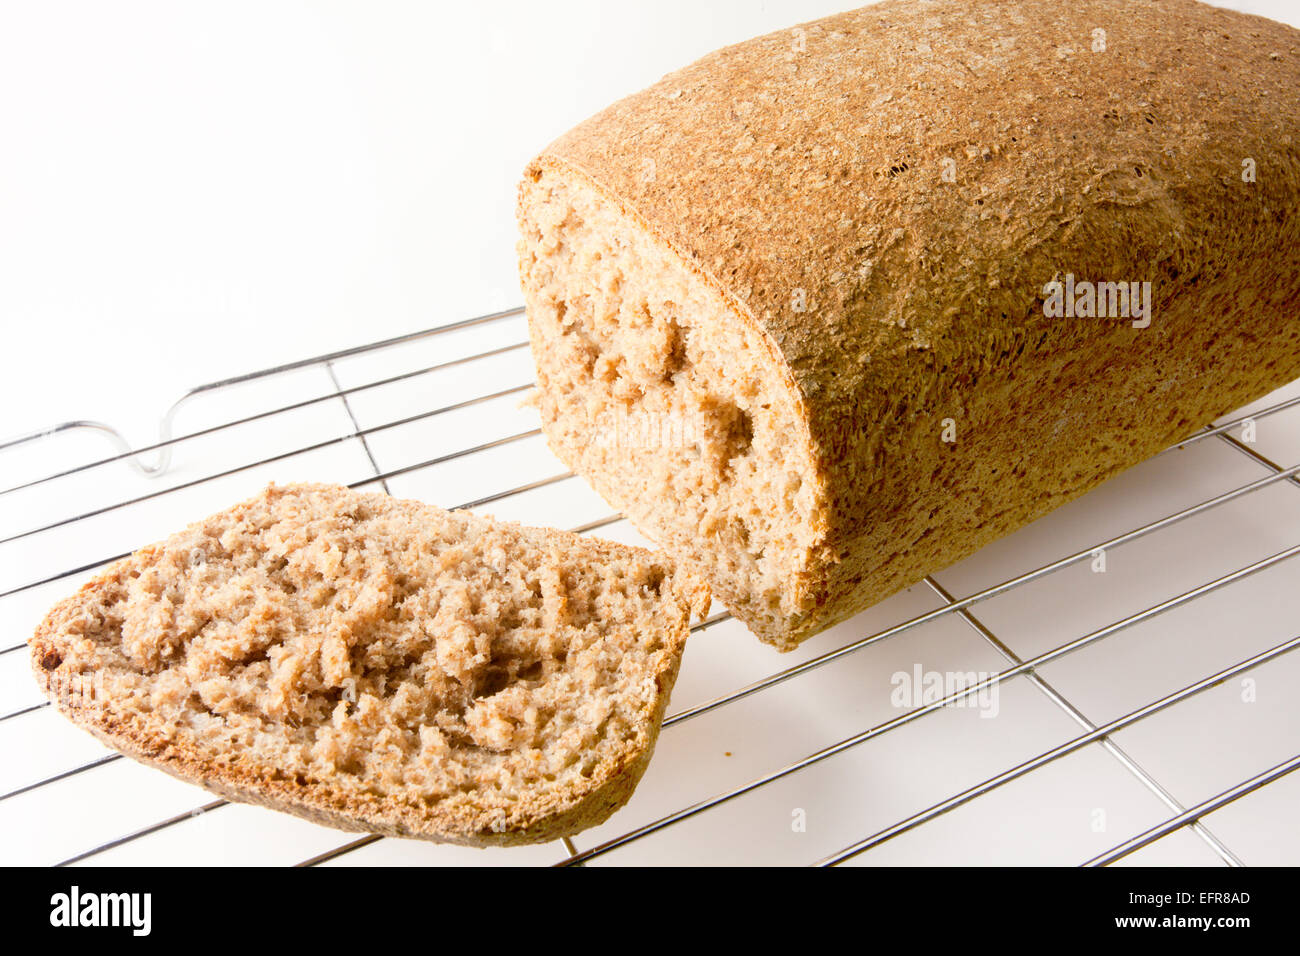 Crust Cut from Freshly Baked Wholemeal Loaf on a Wire Cooling Rack Stock Photo